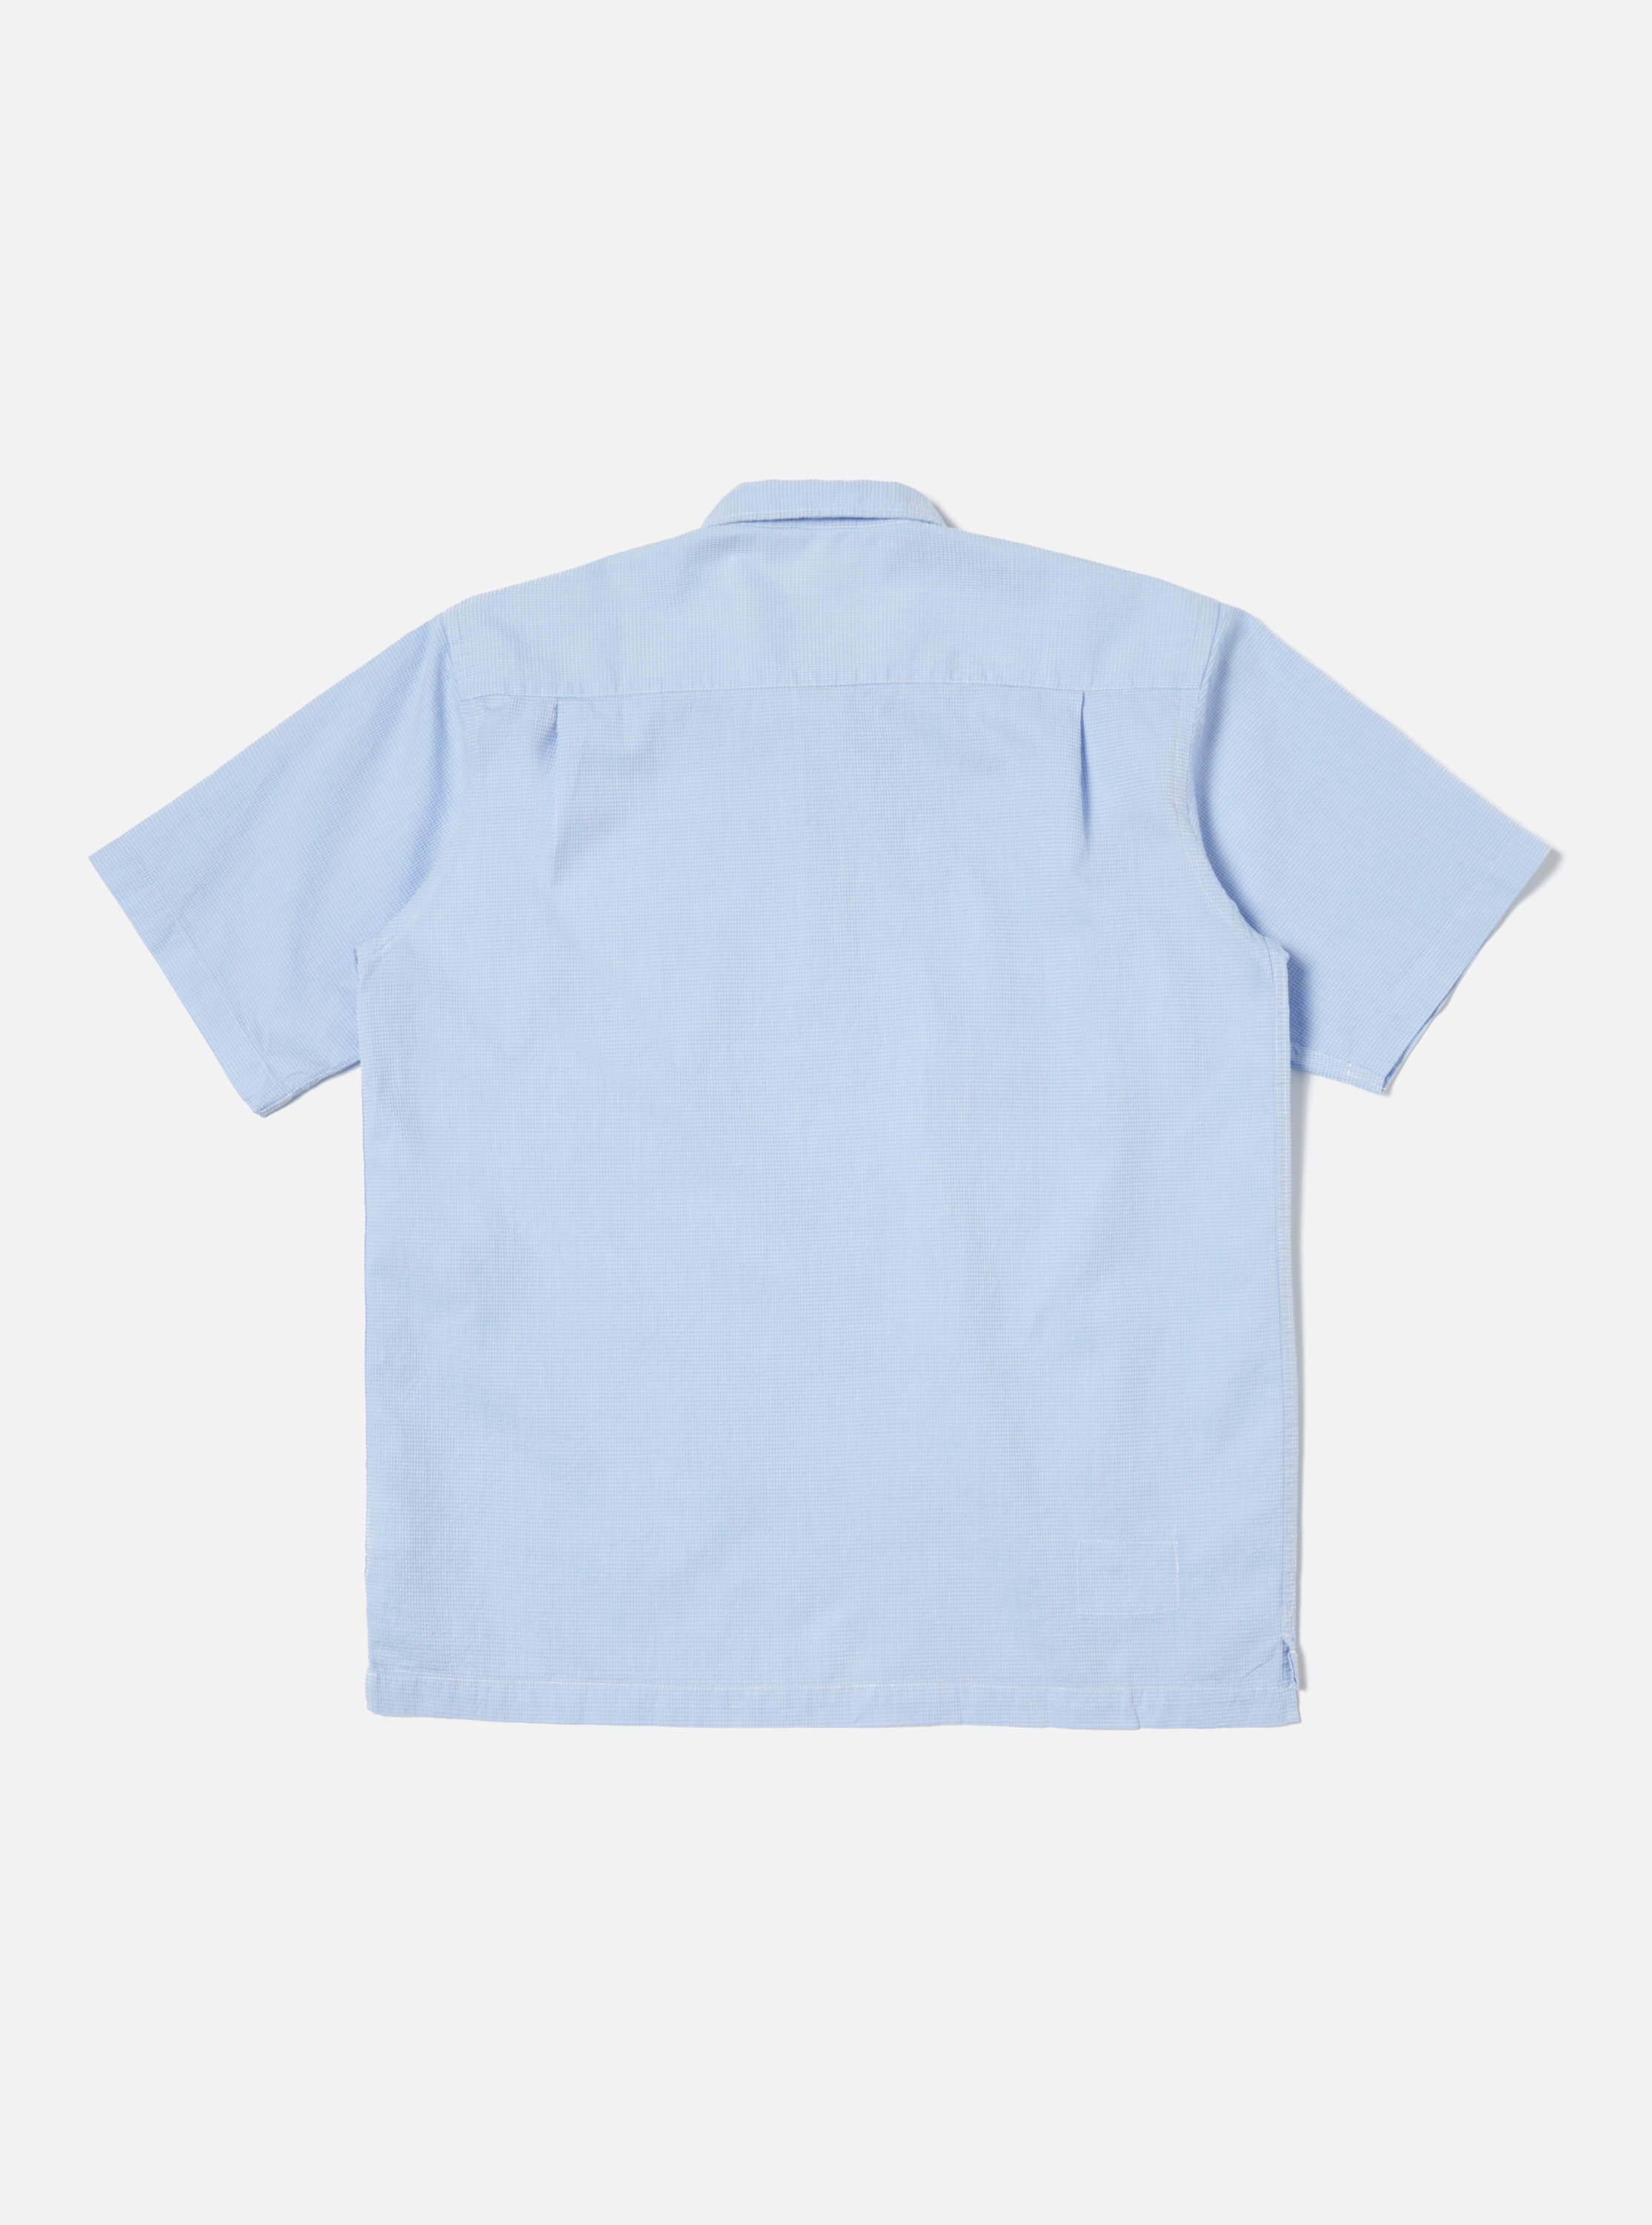 Universal Works Pullover S/S Shirt in Sky Barca Waffle Cotton